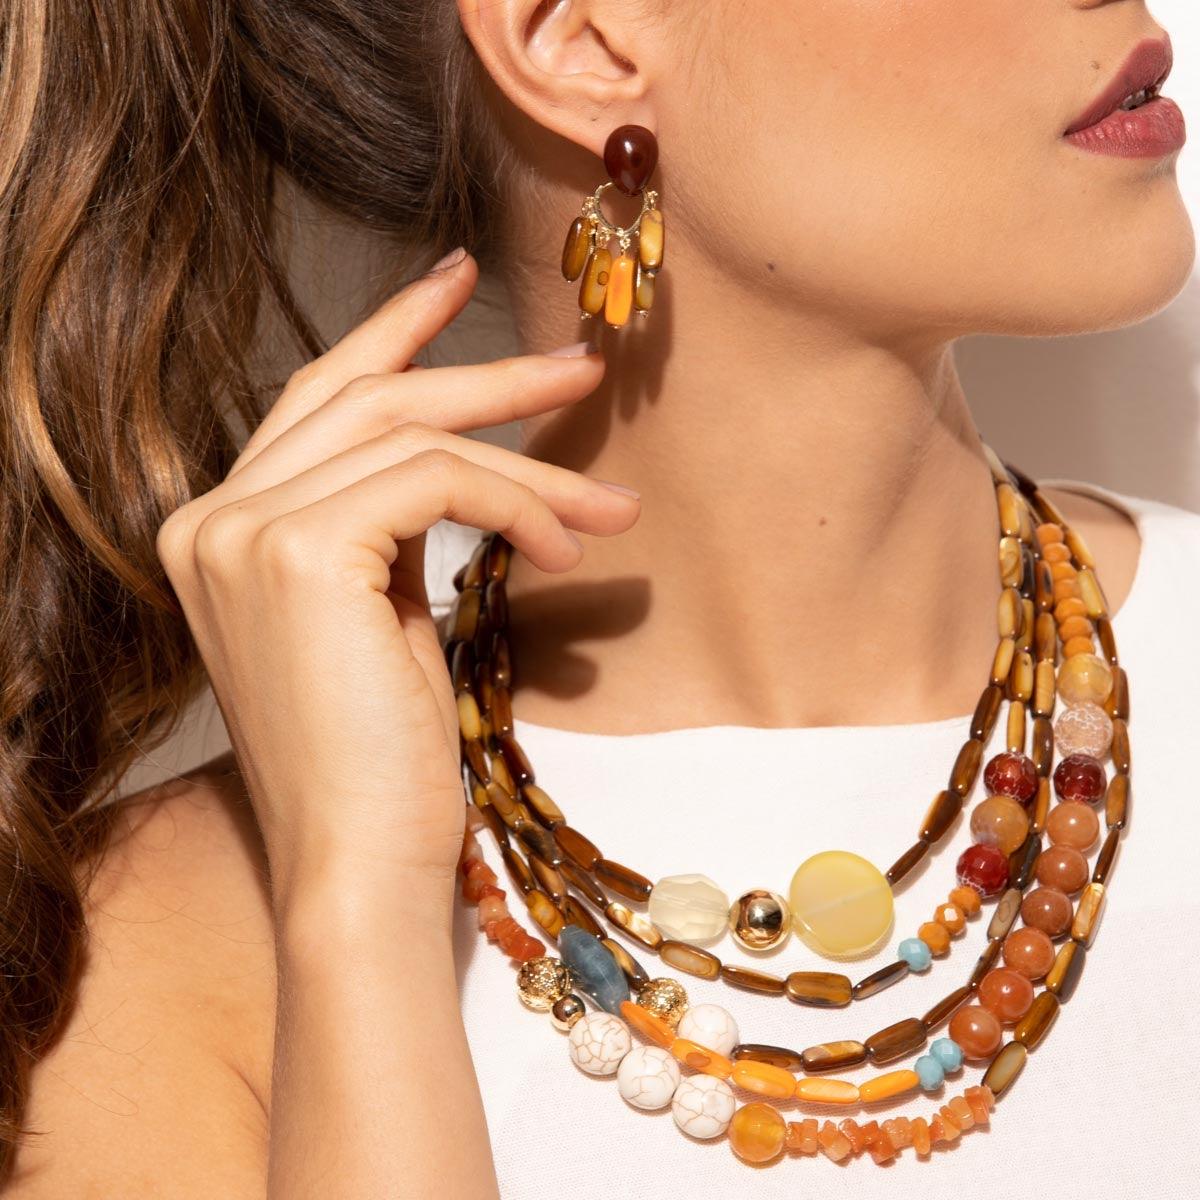 Model wearing dropped earrings. The festival earrings containing a mix of gemstones, pearls and agate are suitable only for pierced ears